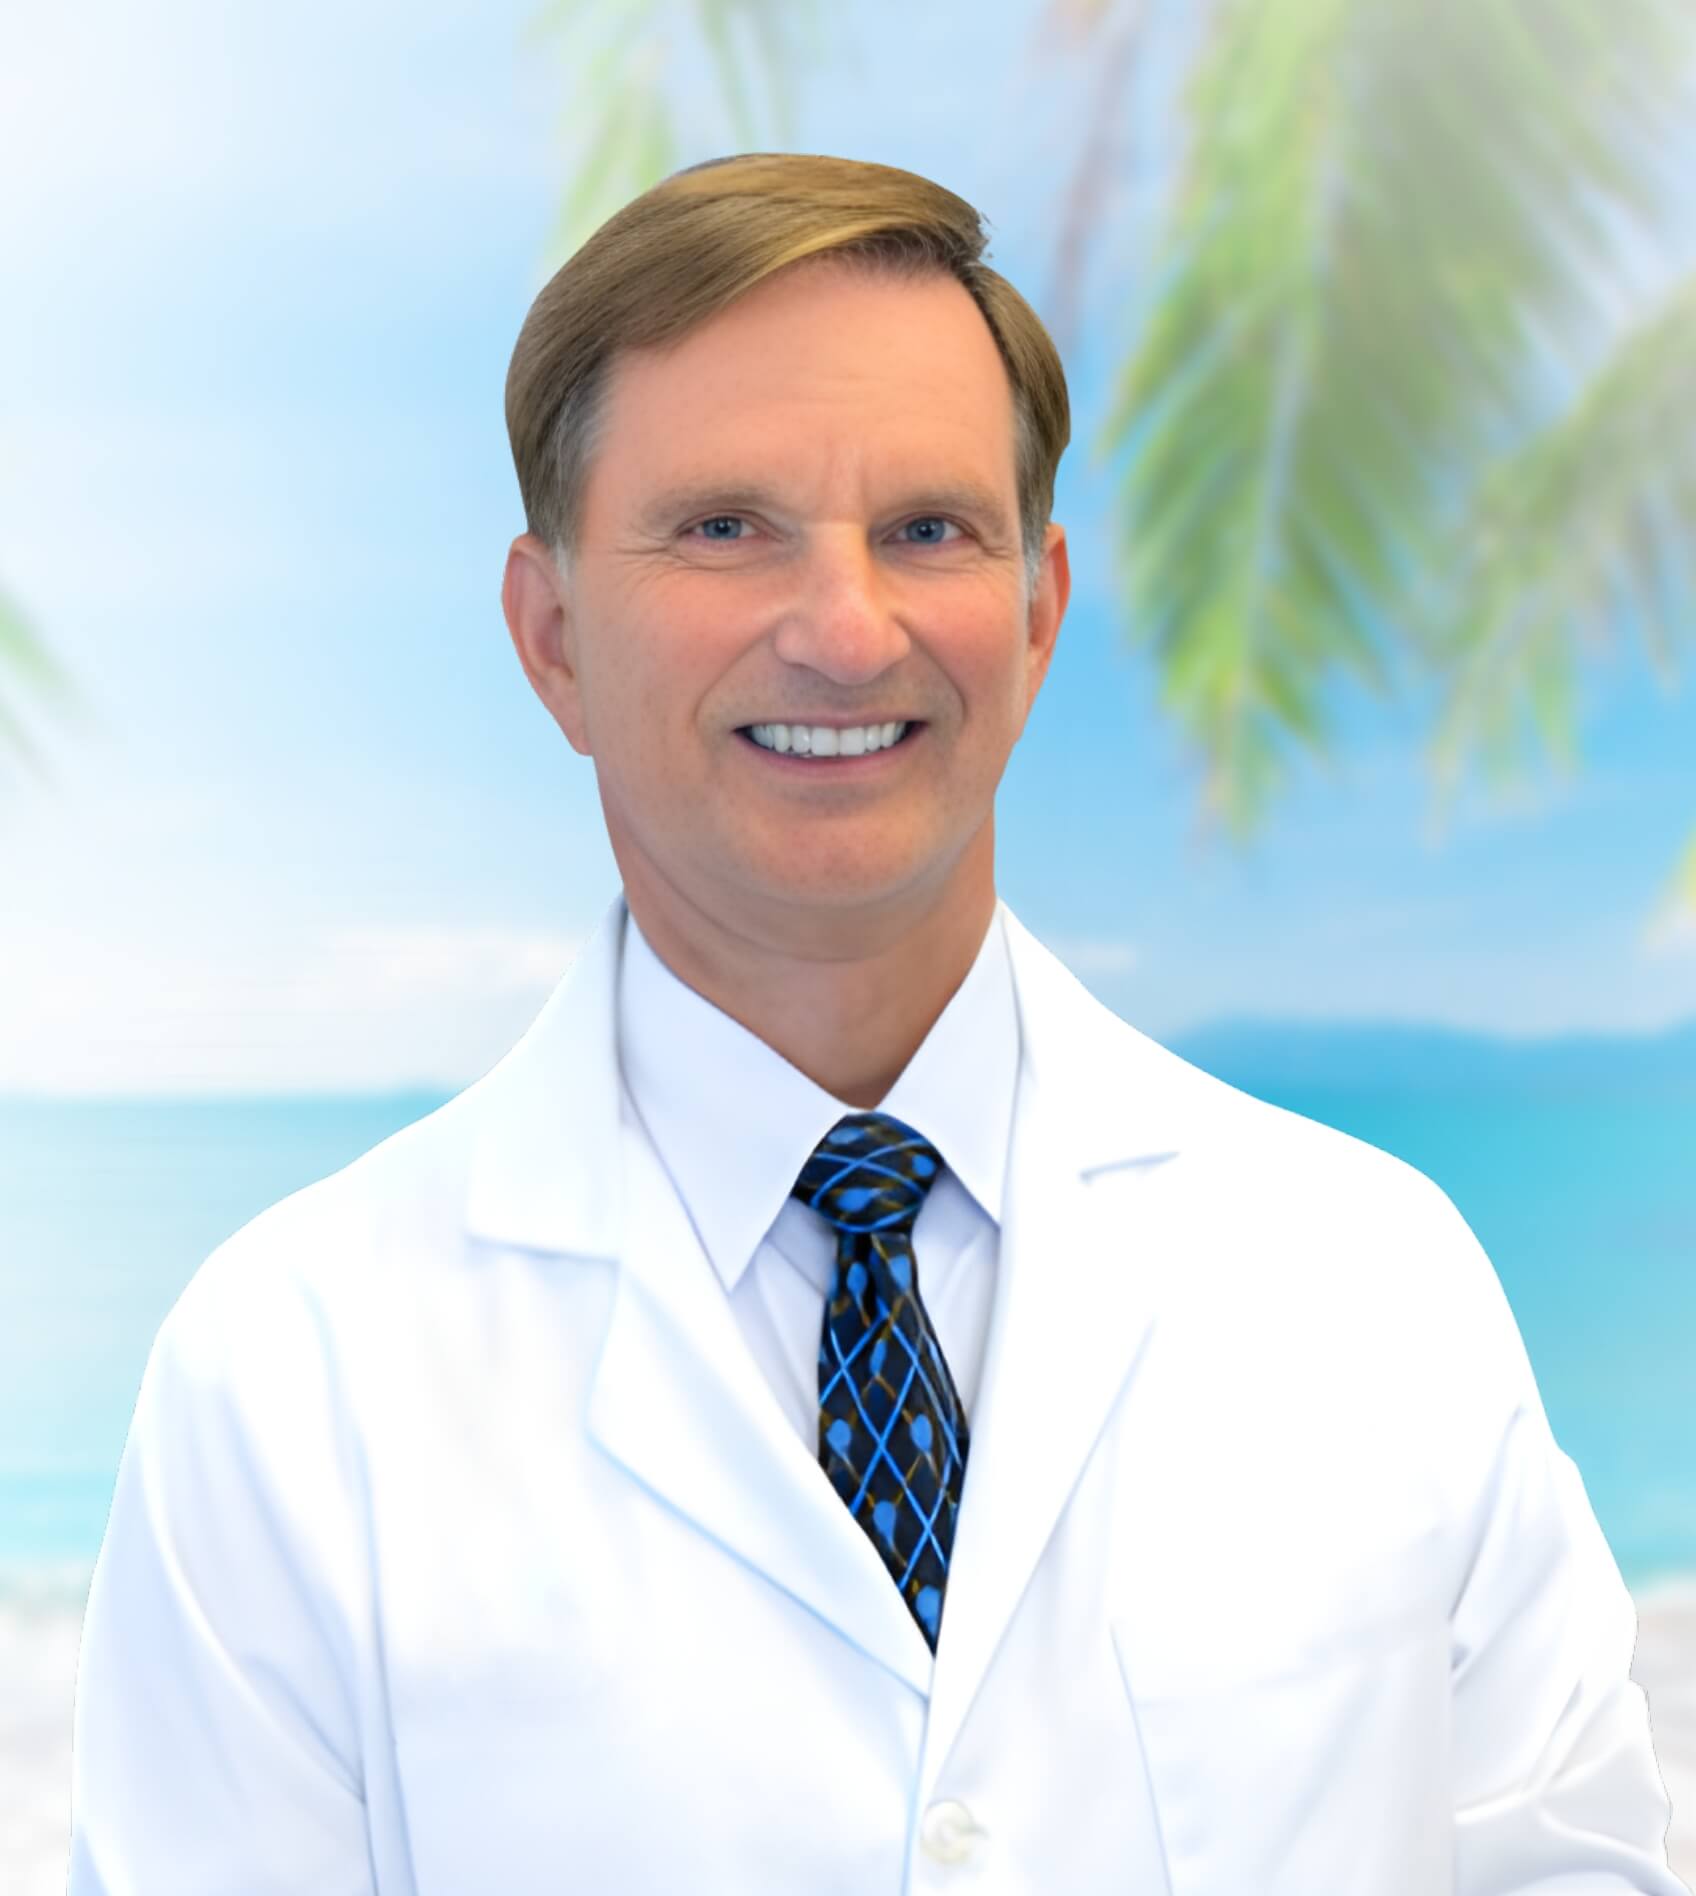 Robert Peterson, MD, MSEE